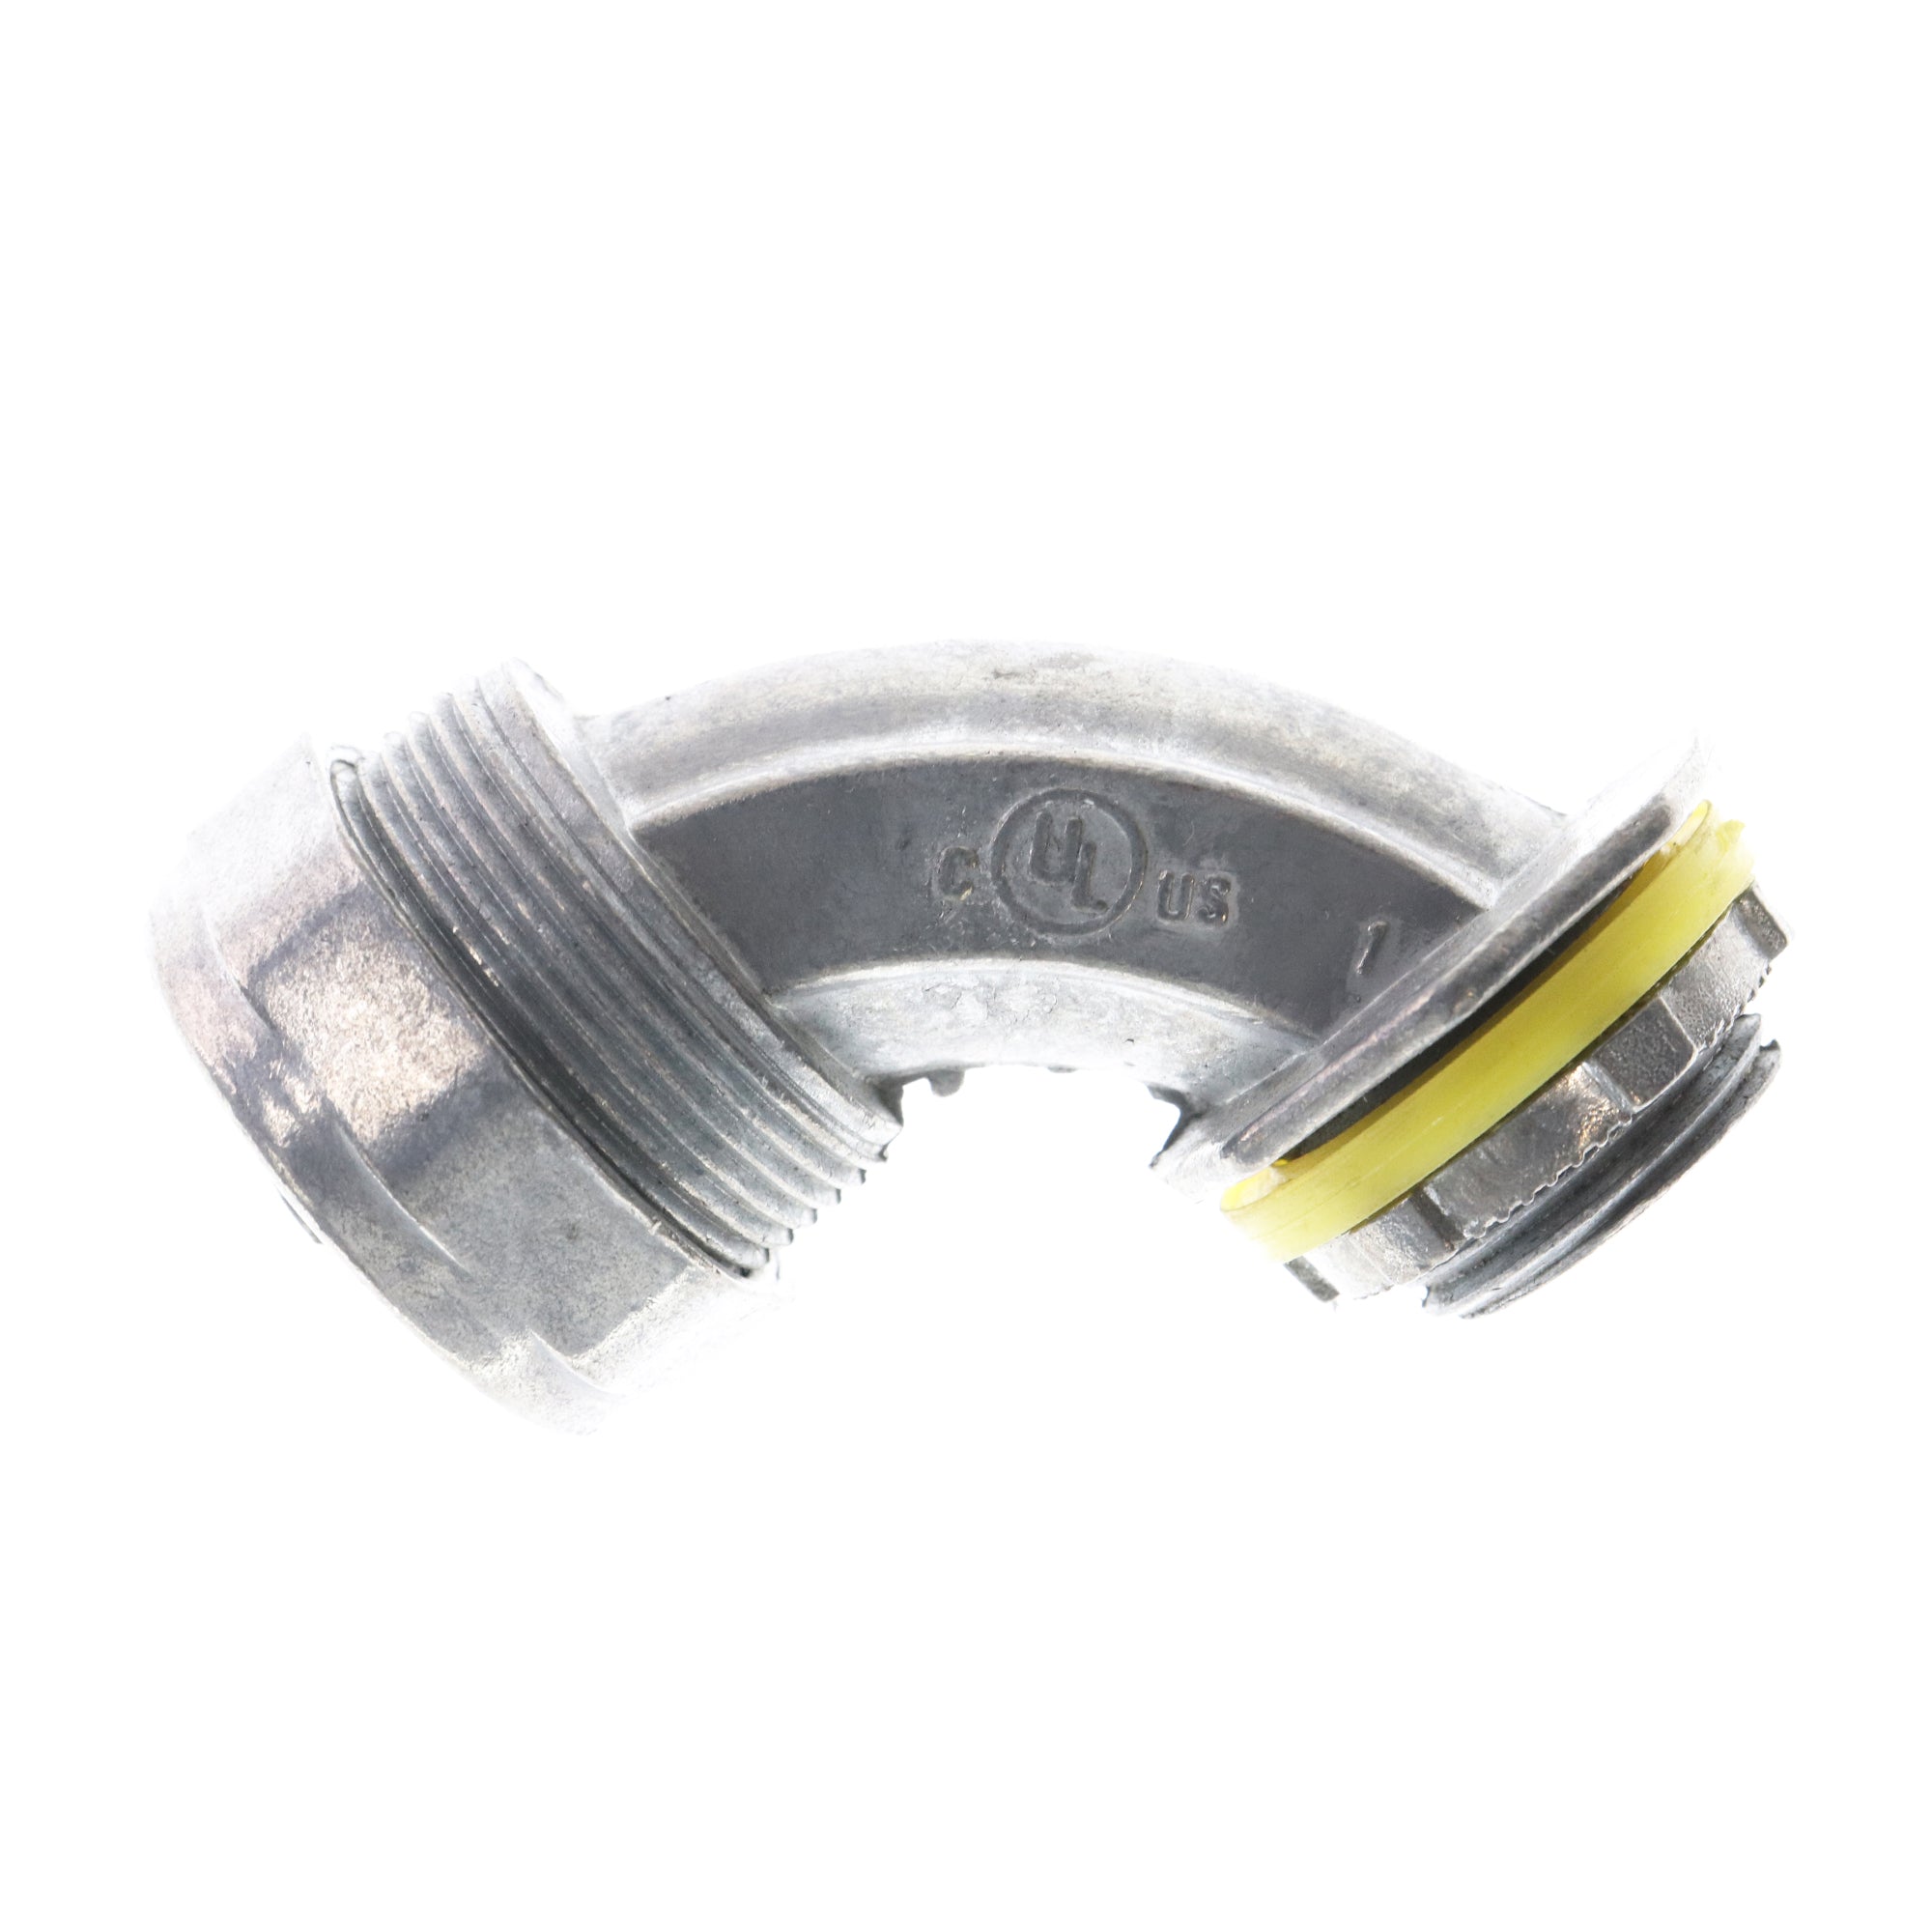 Crouse Hinds, CROUSE-HINDS LT3890DC NON-INS. LT LIQUID-TIGHT CONNECTOR, 3/8", 90°, (15-PACK)